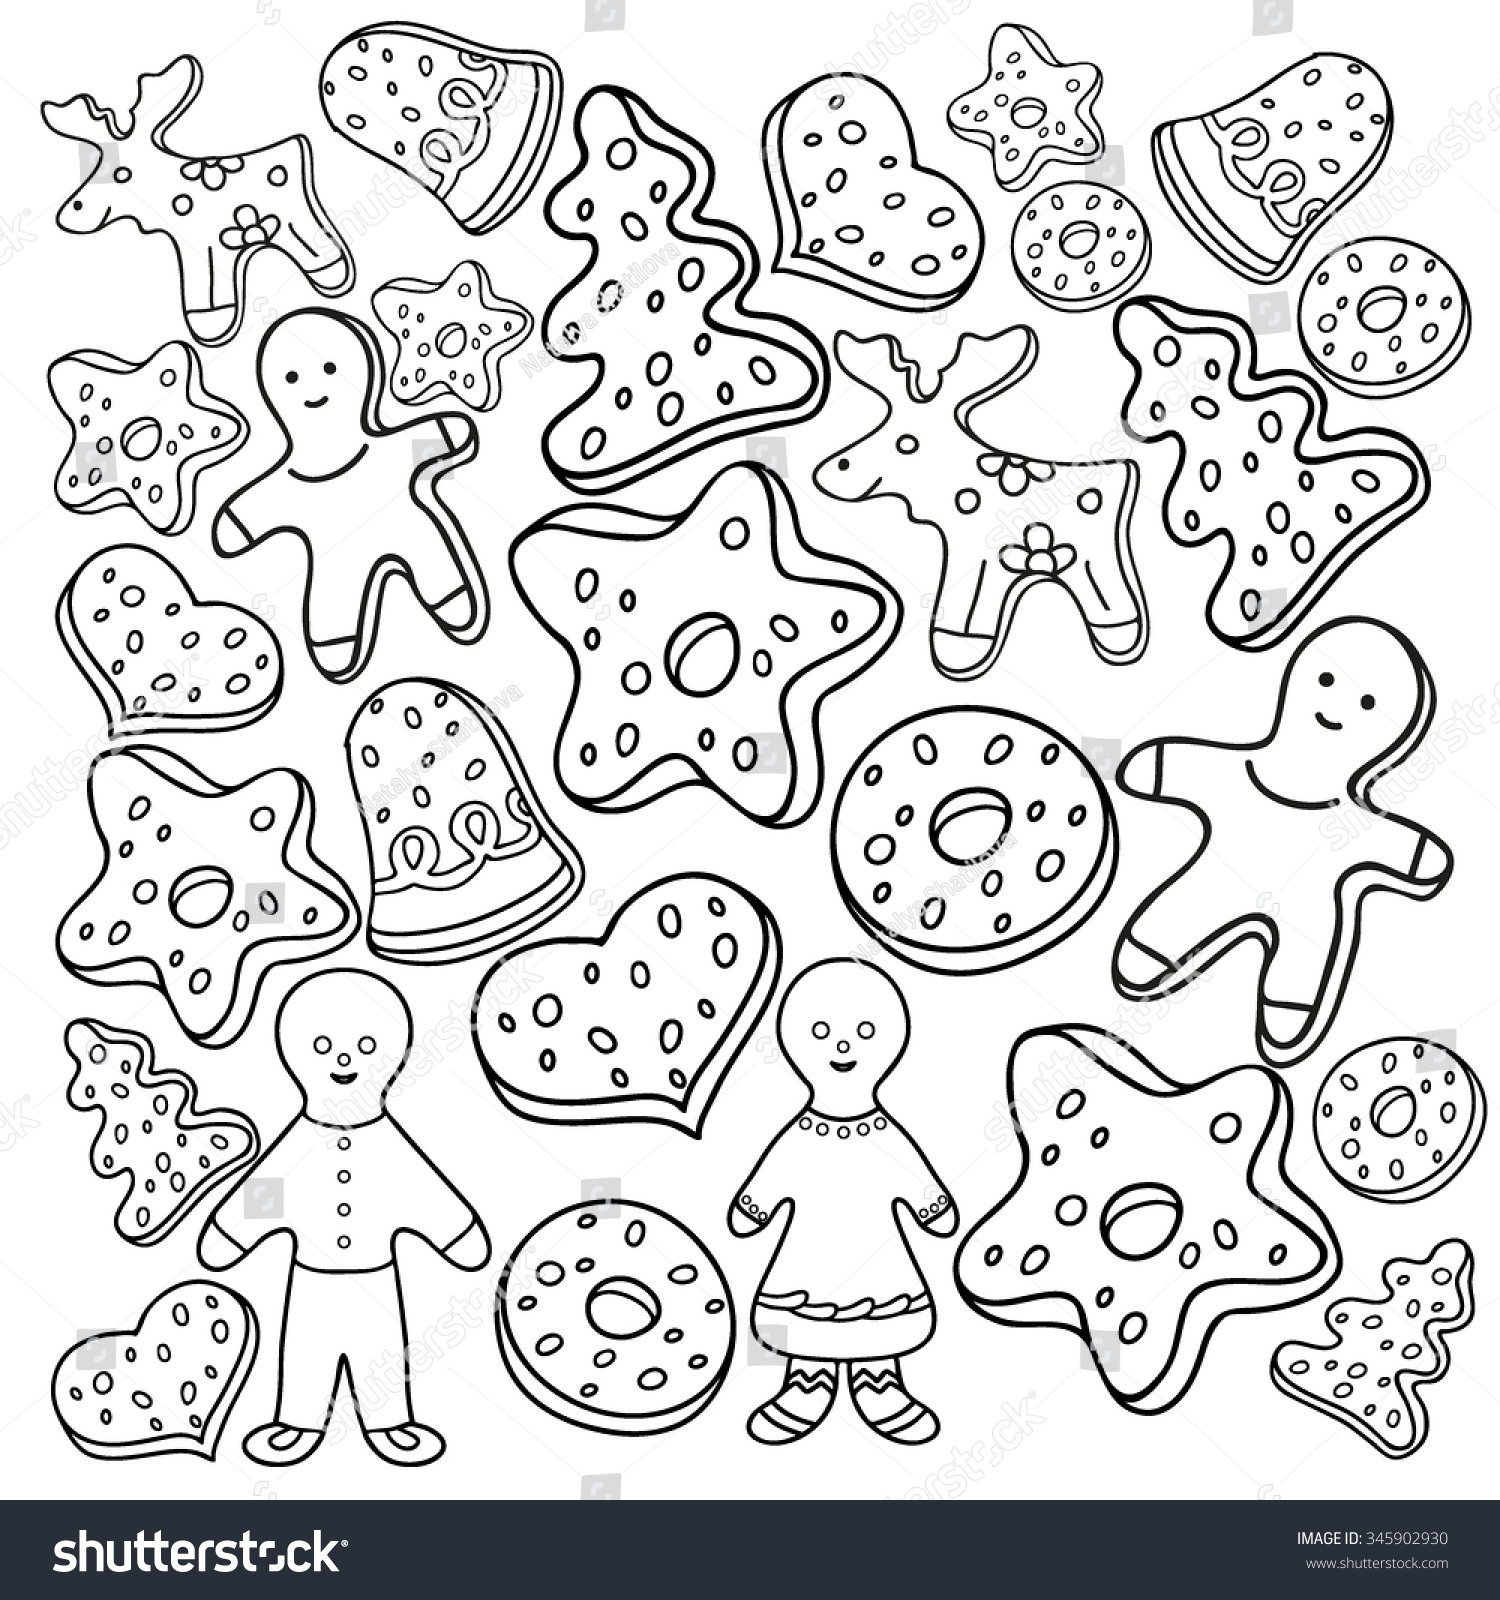 Christmas Cookies Coloring Pages
 Coloring Book Hand Drawn Black White Stock Vector